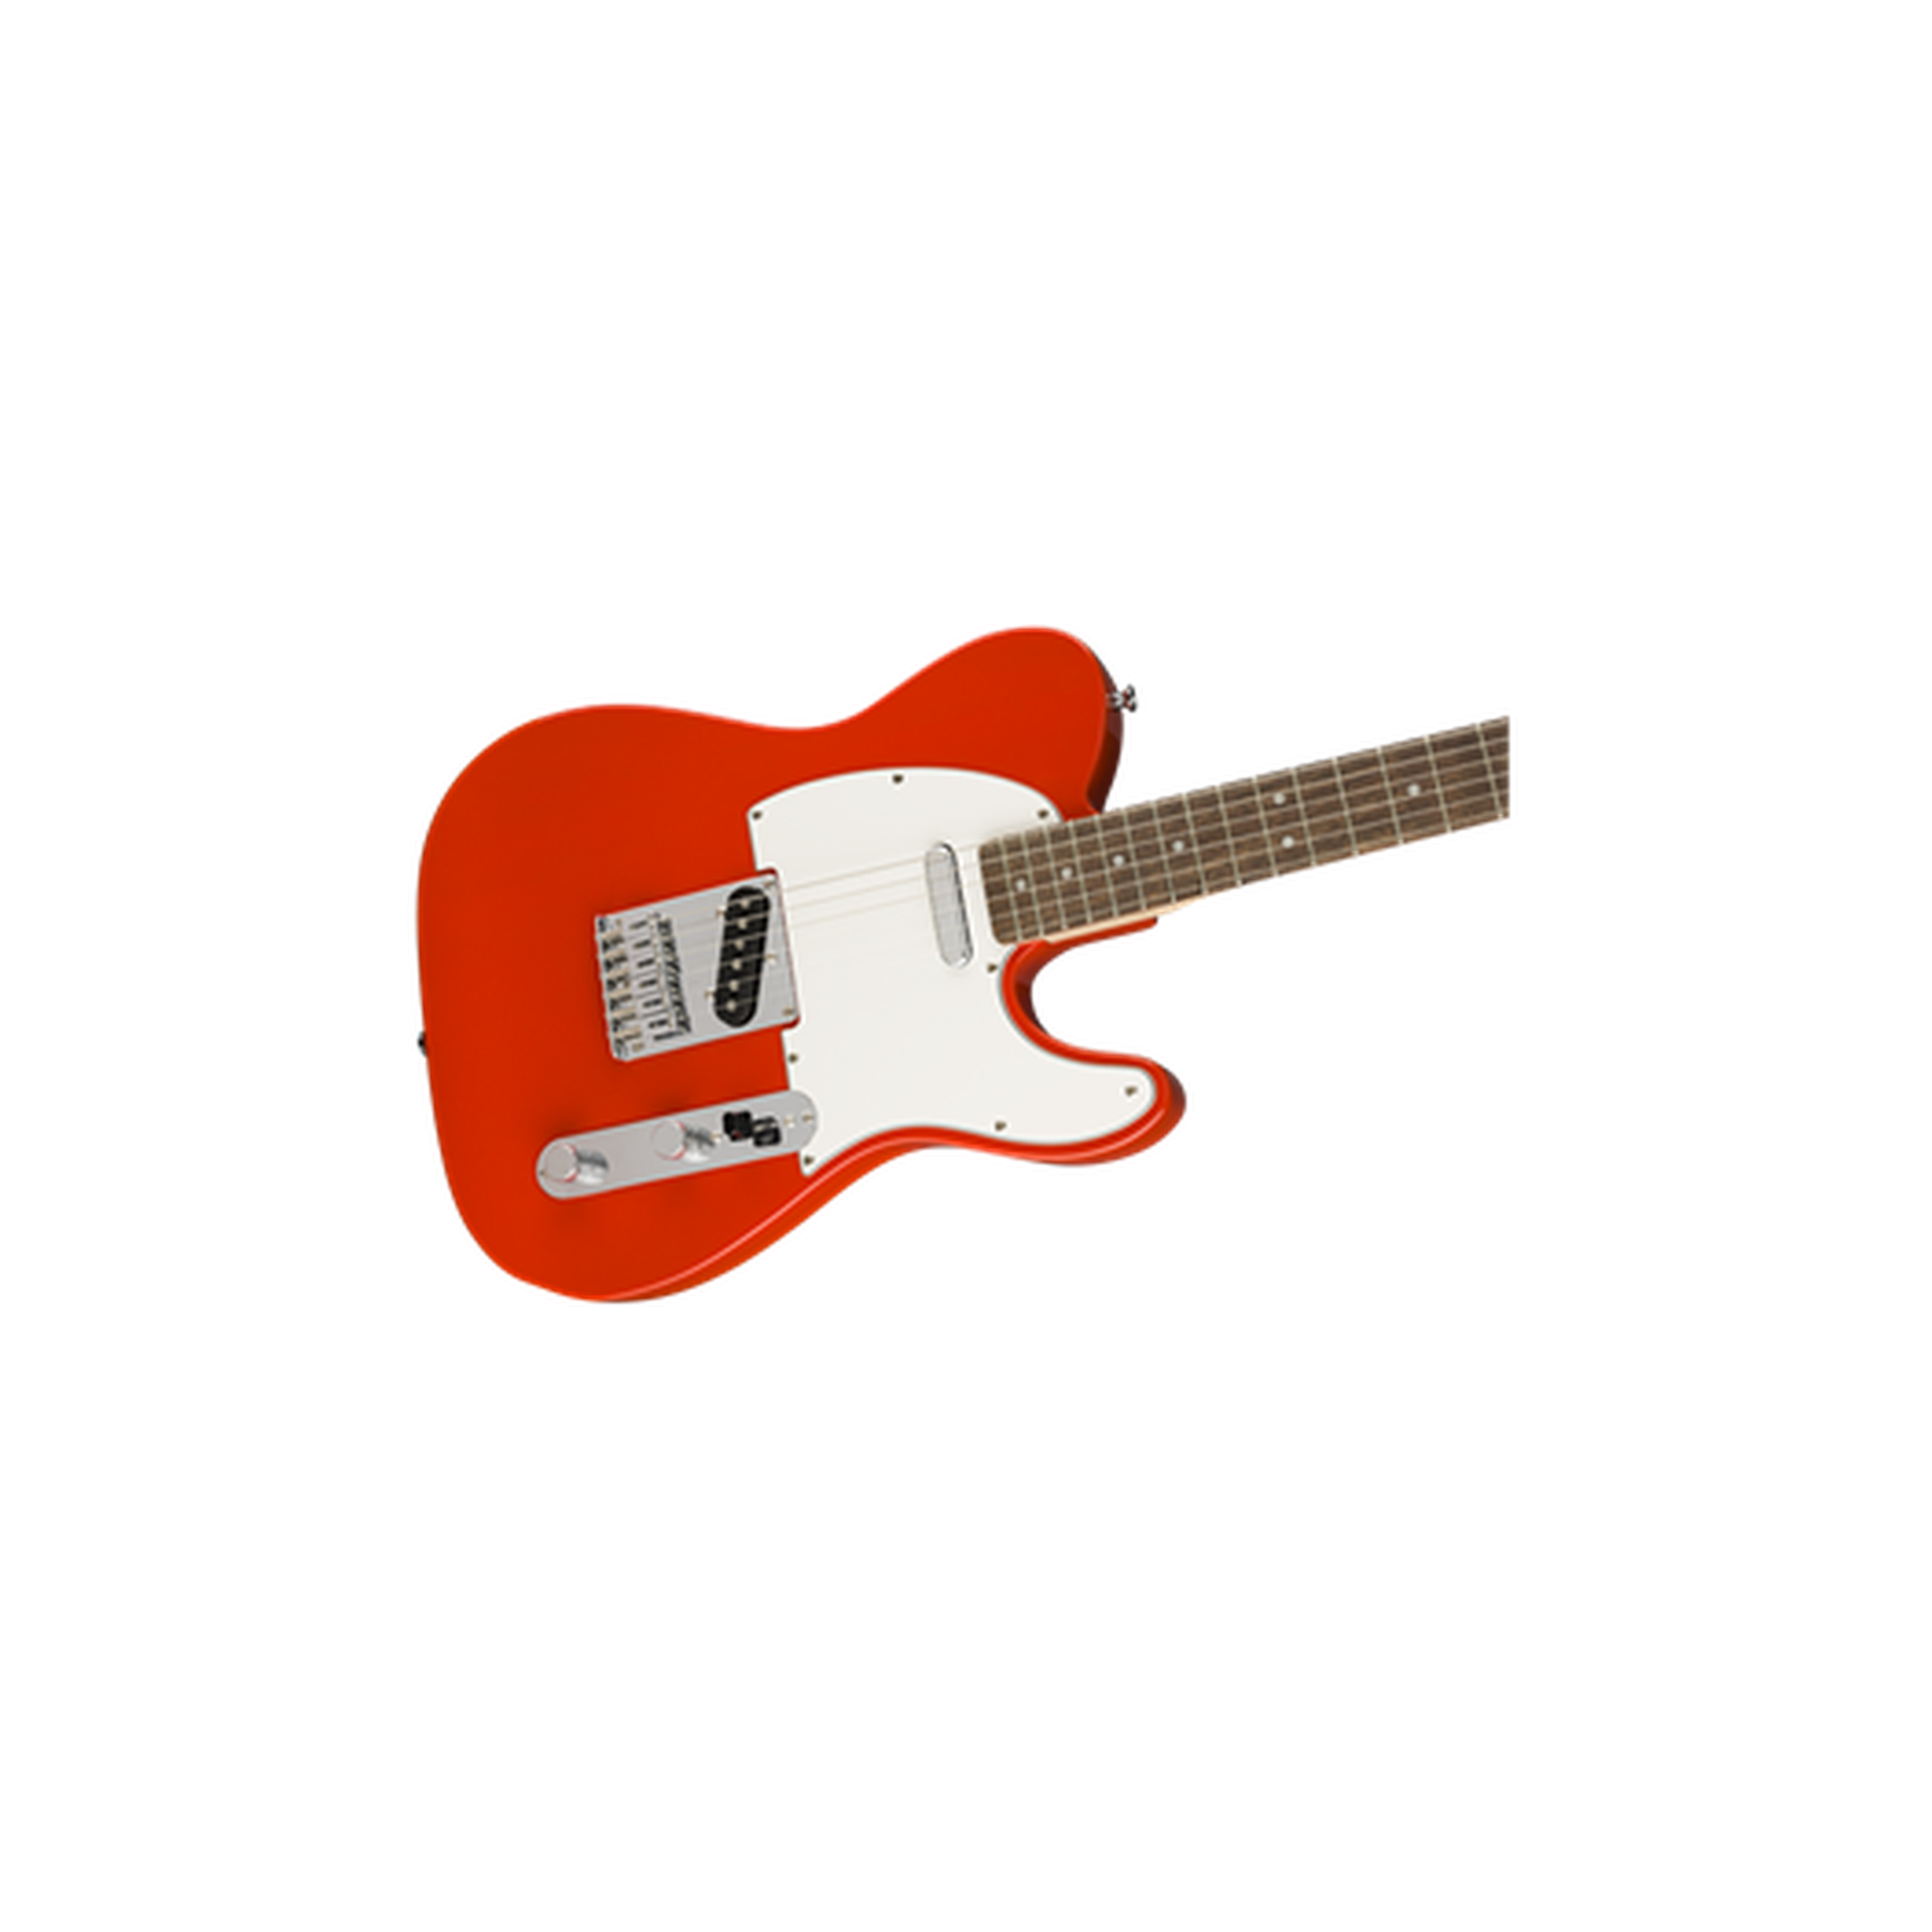 Squier Affinity Telecaster – Grayson's Tunetown